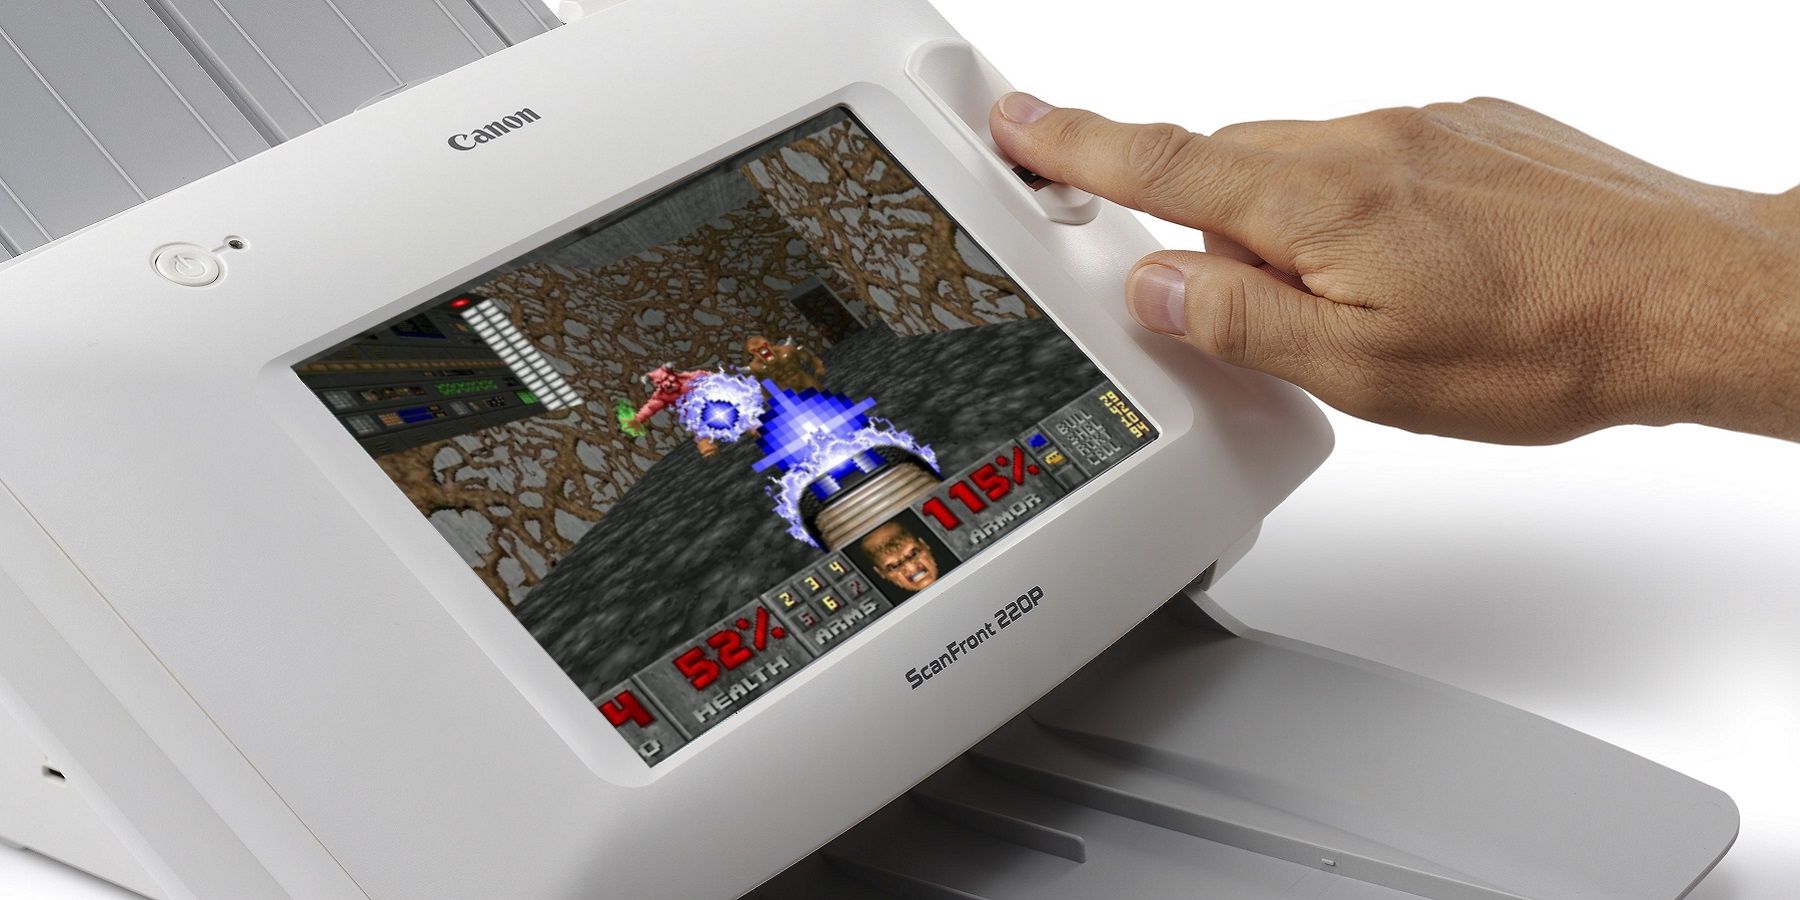 Image of a hand activating a Canon scanner that has Doom playing on the screen.